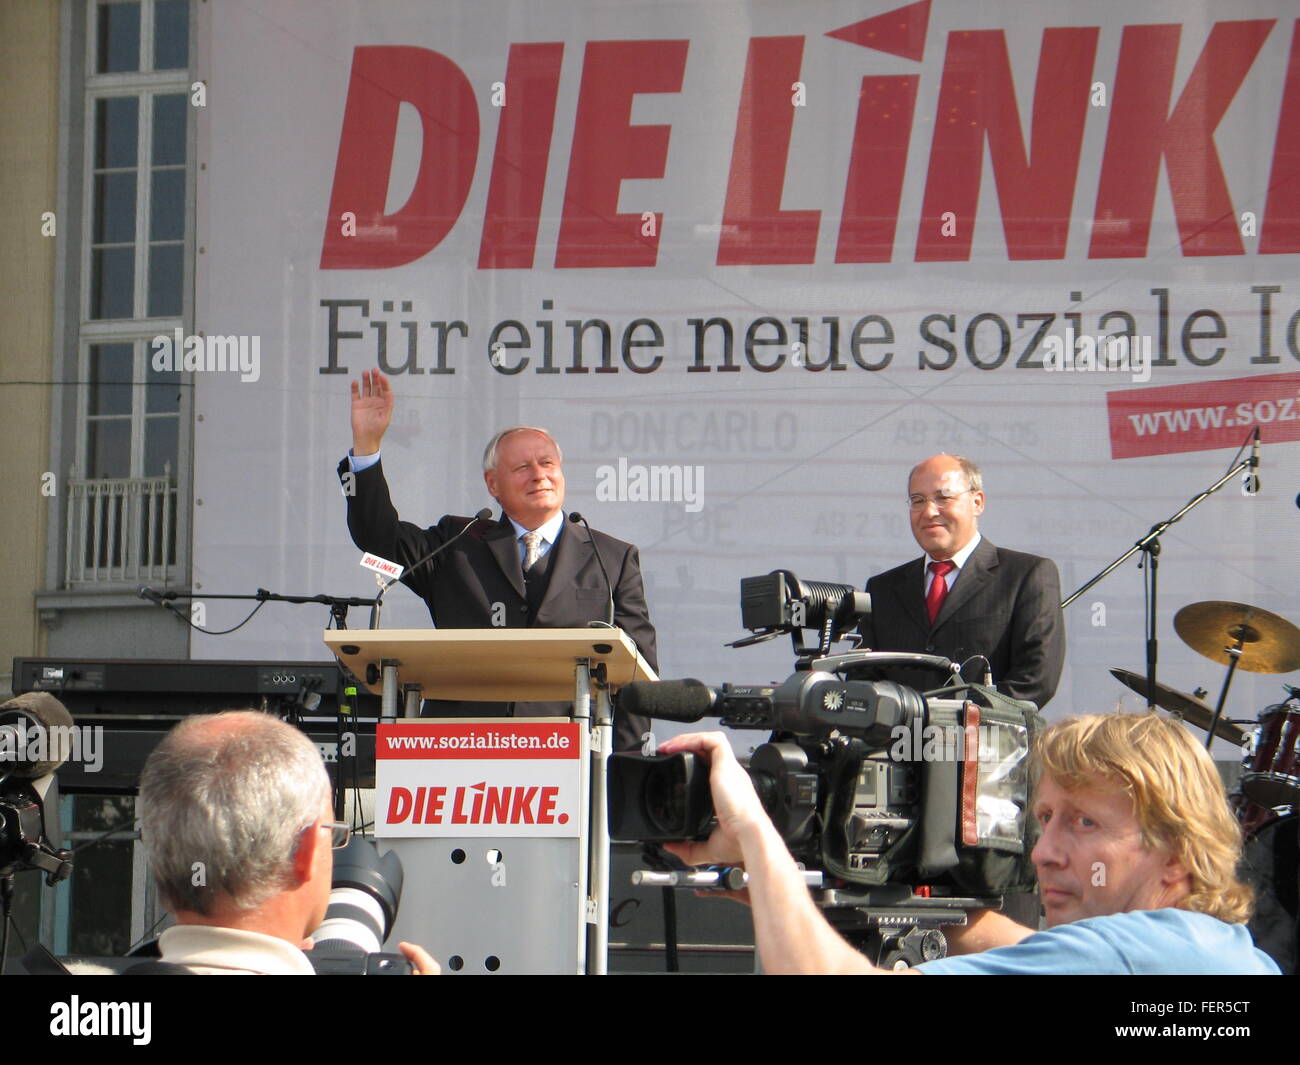 Oskar Lafontaine and Gregor Gysi from the German Party 'Die Linke', at the election 2005, in Saarbrücken, Germany Stock Photo